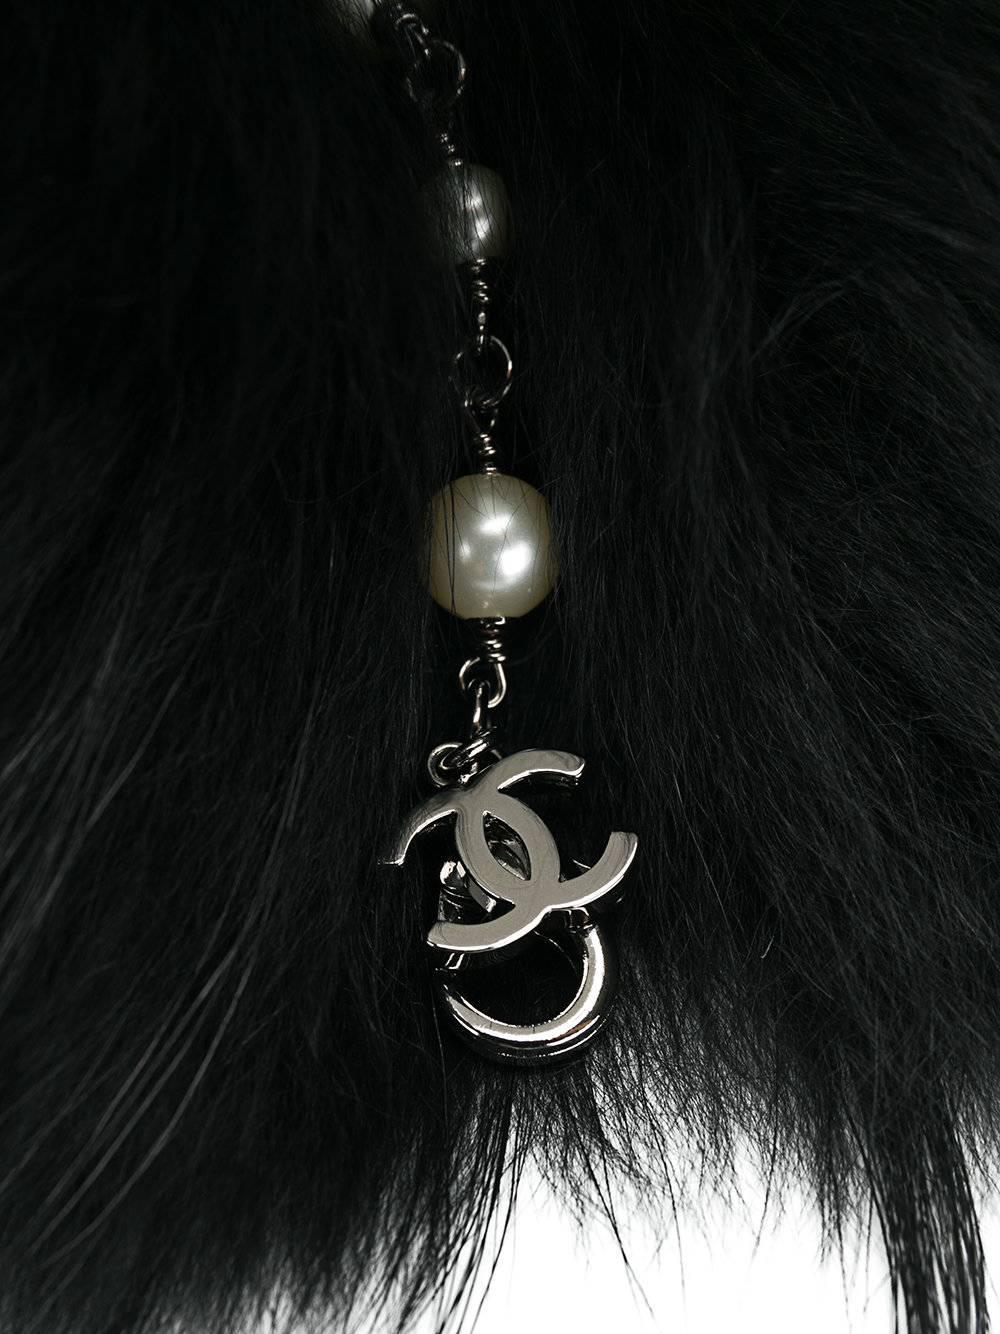 Black cashmere raccoon fur collar from Chanel e featuring a cc faux-pearl chain. 

Colour: Black

Composition: 100% Cashmere (Lining), 100% Racoon Fur (Outer)

One Size

Condition: 10/10